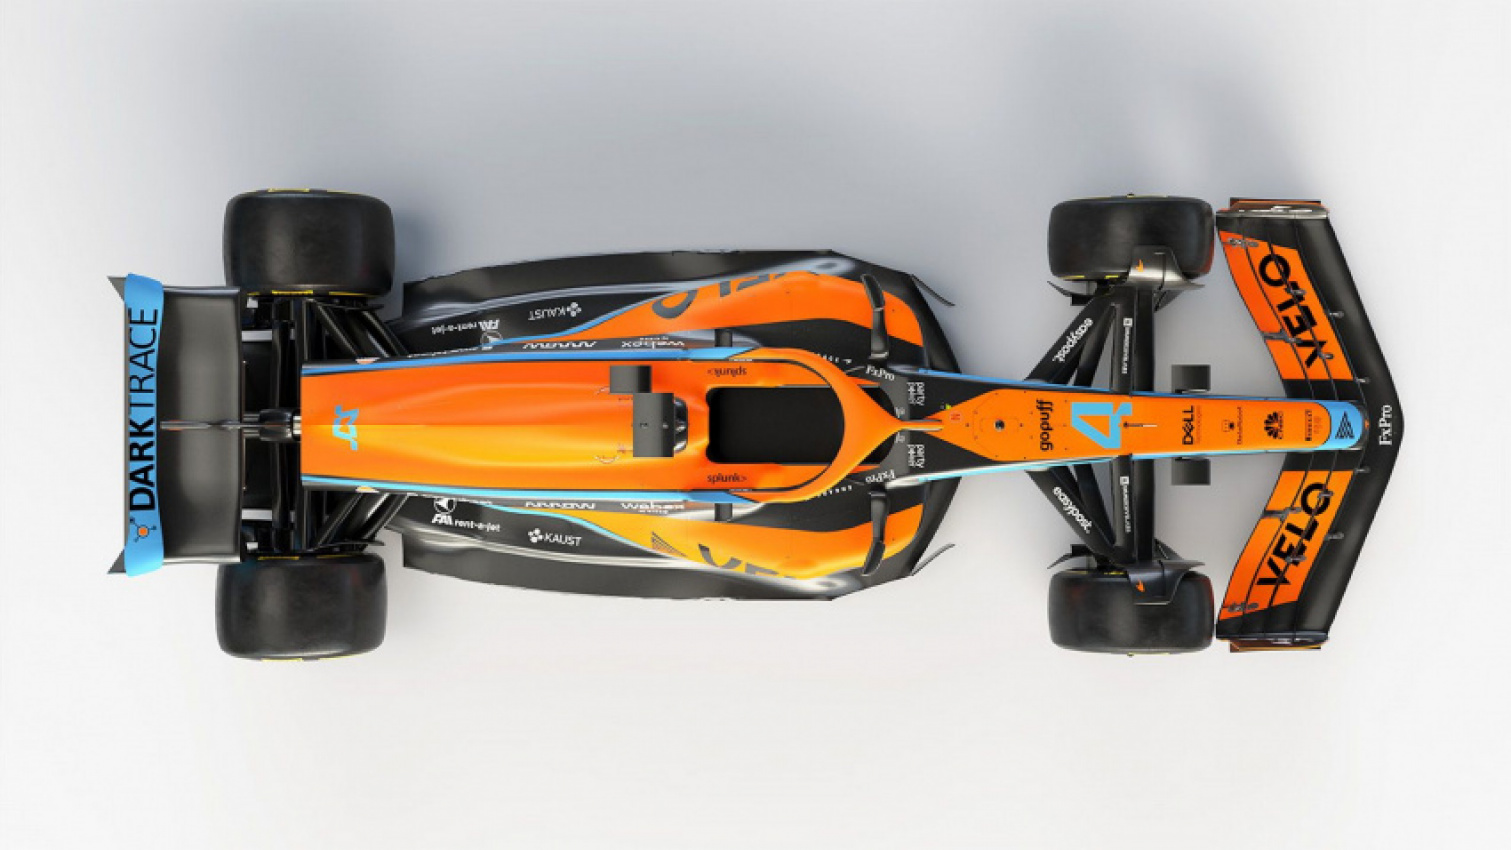 autos, cars, mclaren, news, extreme e, indy, motorsports, racing, 2022 mclaren mcl36 bows with bold new livery, team also unveils contenders for indycar and extreme e